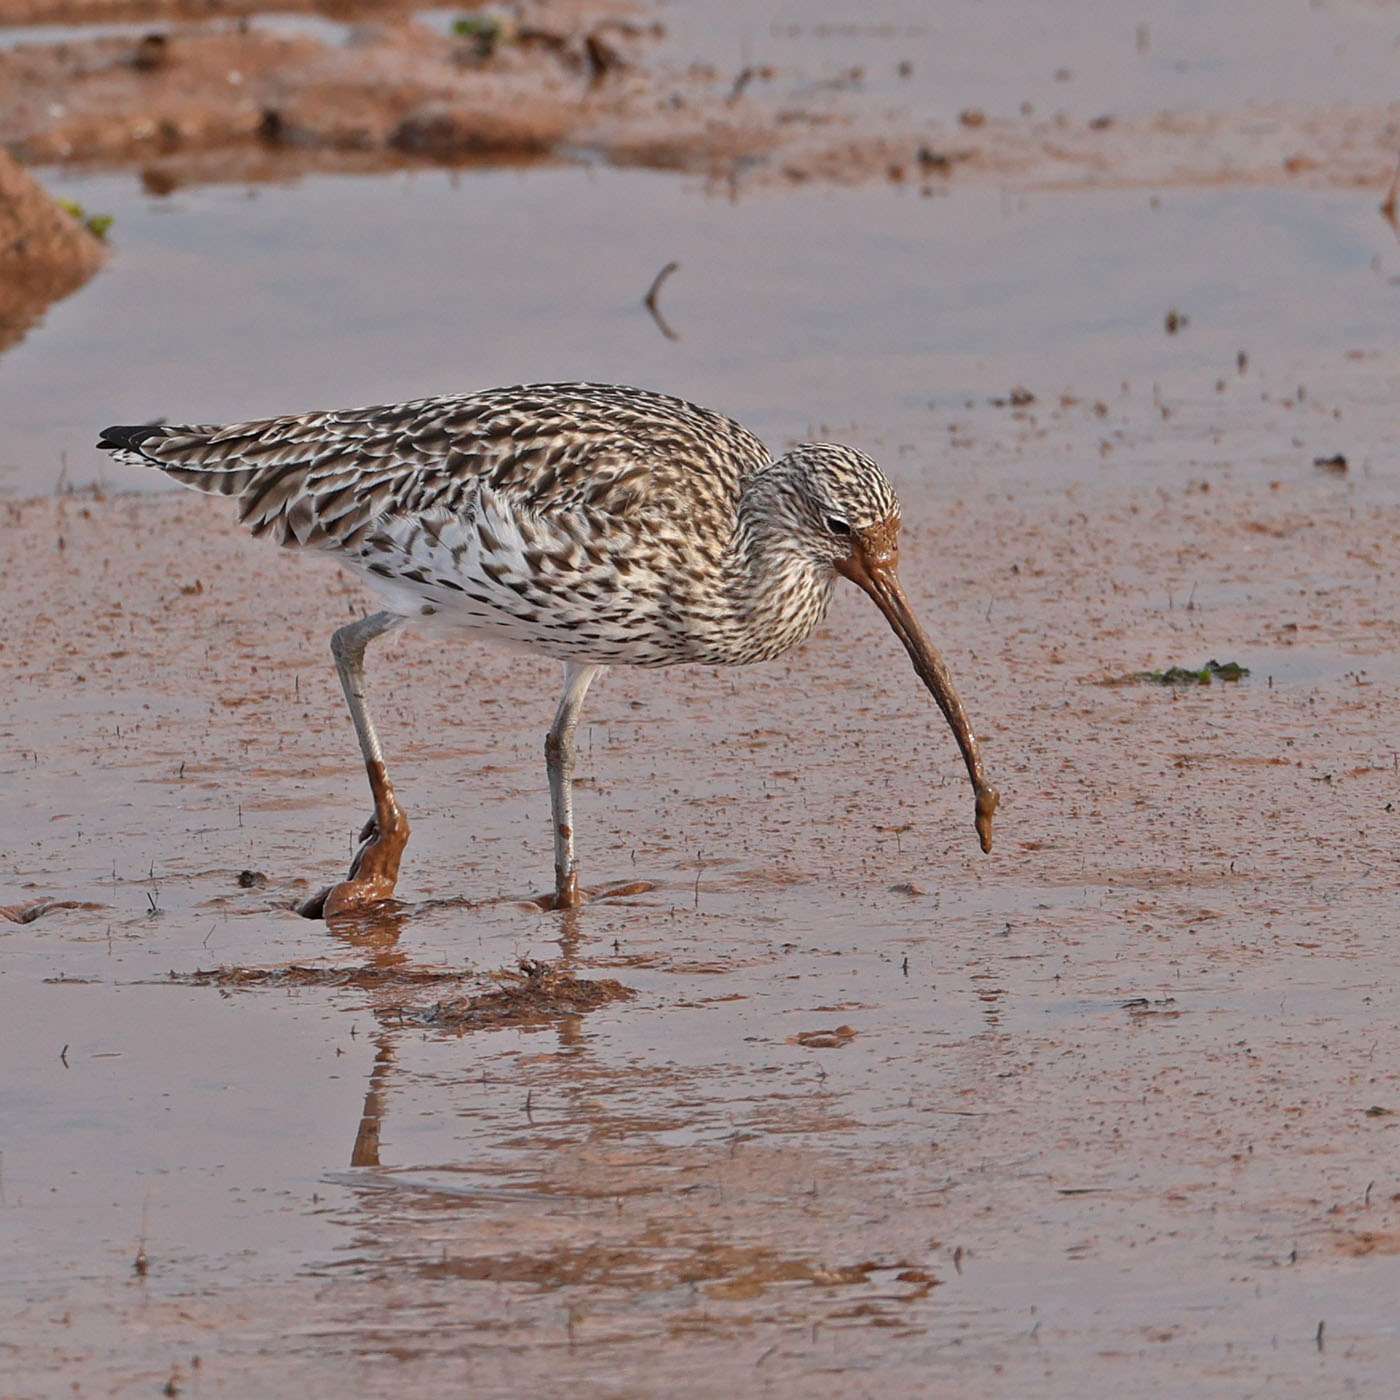 Curlew by Steve Hopper at Starcross